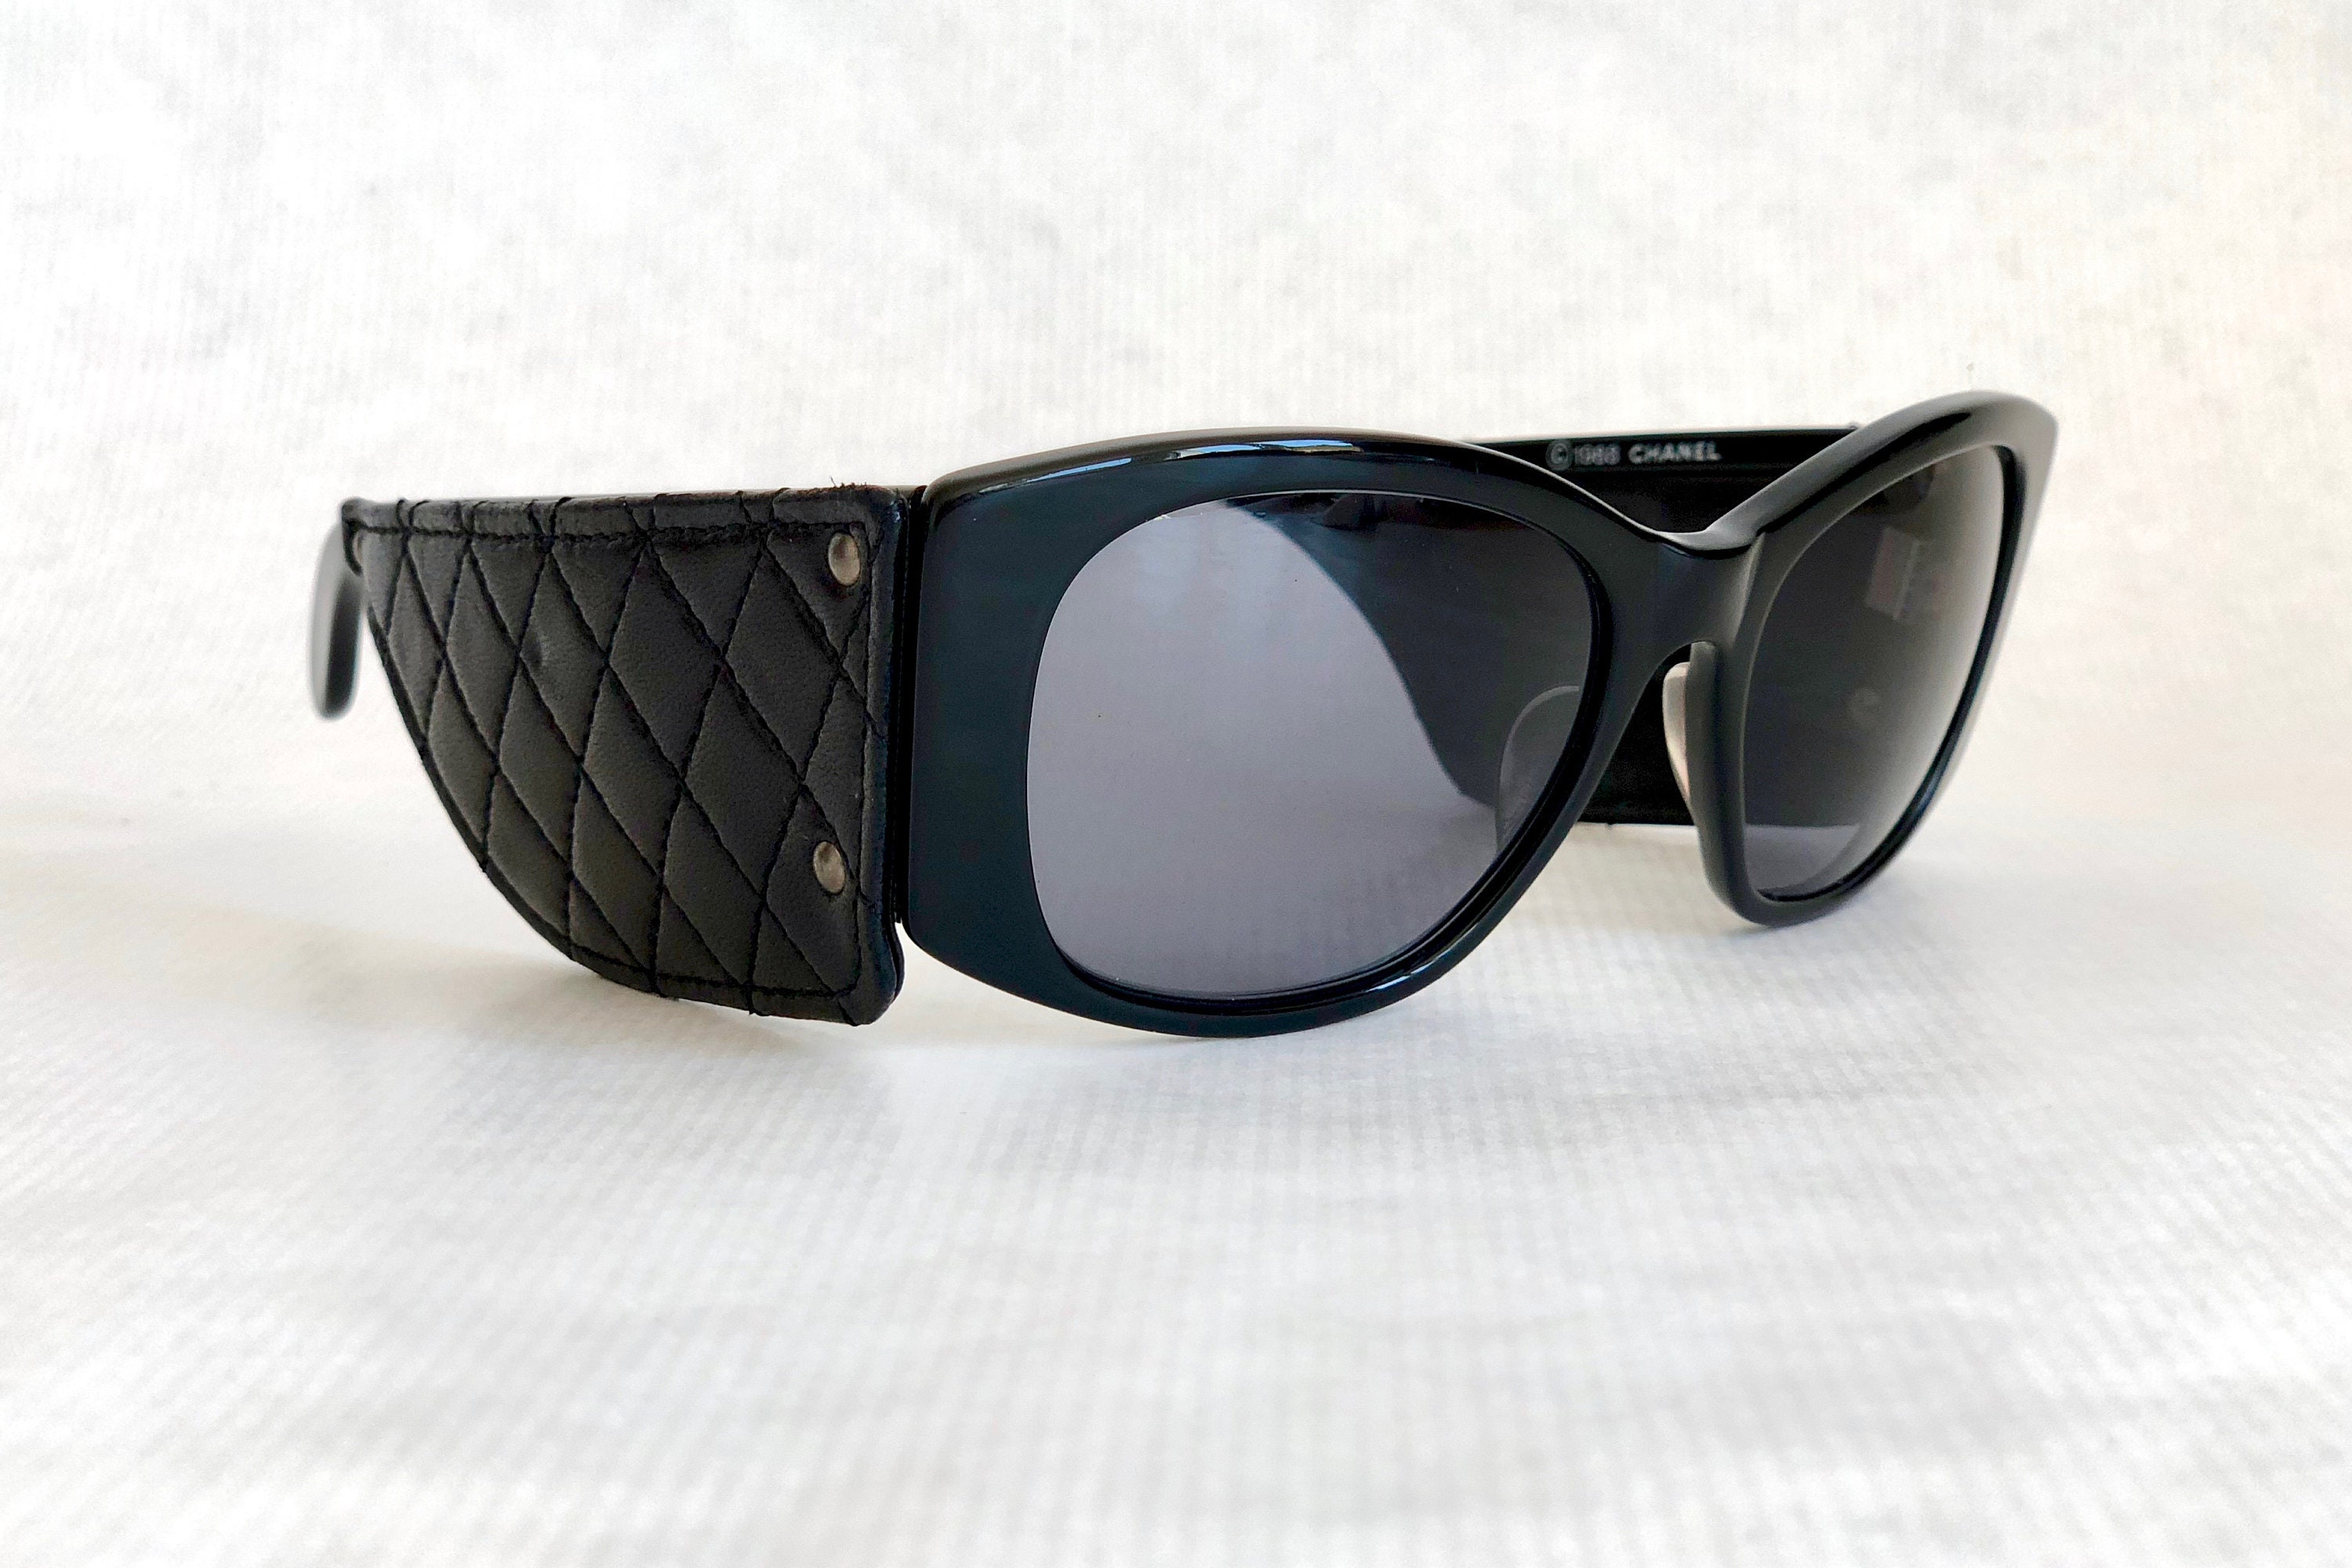 CHANEL Vintage Sunglasses Rare Matelasse Leather Quilted Wrap